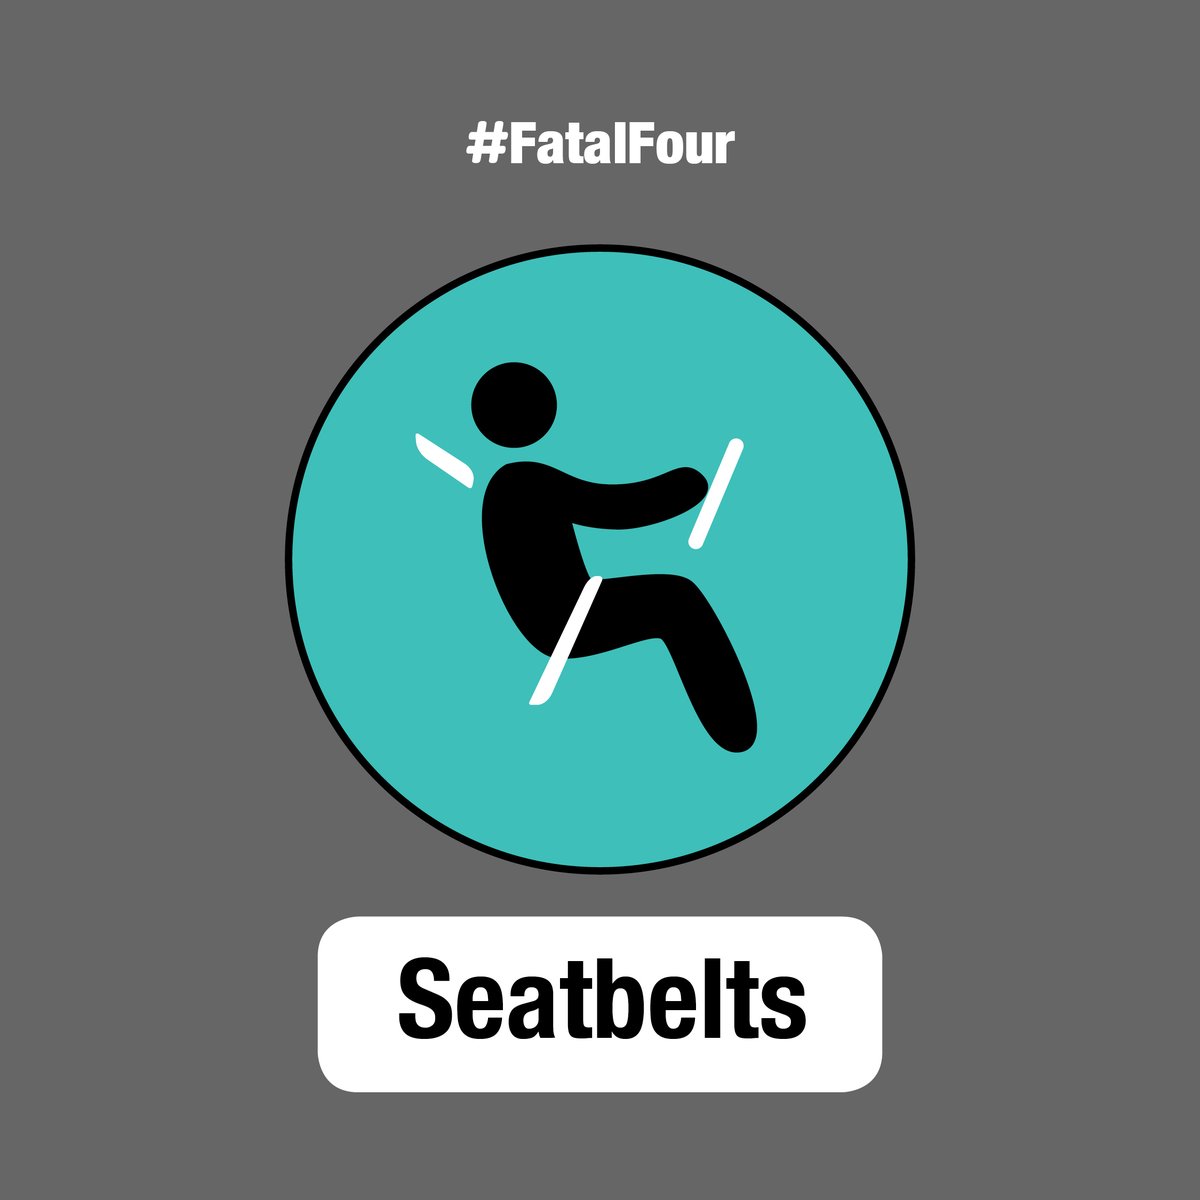 It is the law to wear your seatbelt and most motorists know it makes sense. Not wearing a seatbelt can be a fatal decision, even on short, familiar journeys and at low speed #BeltUp #FatalFour